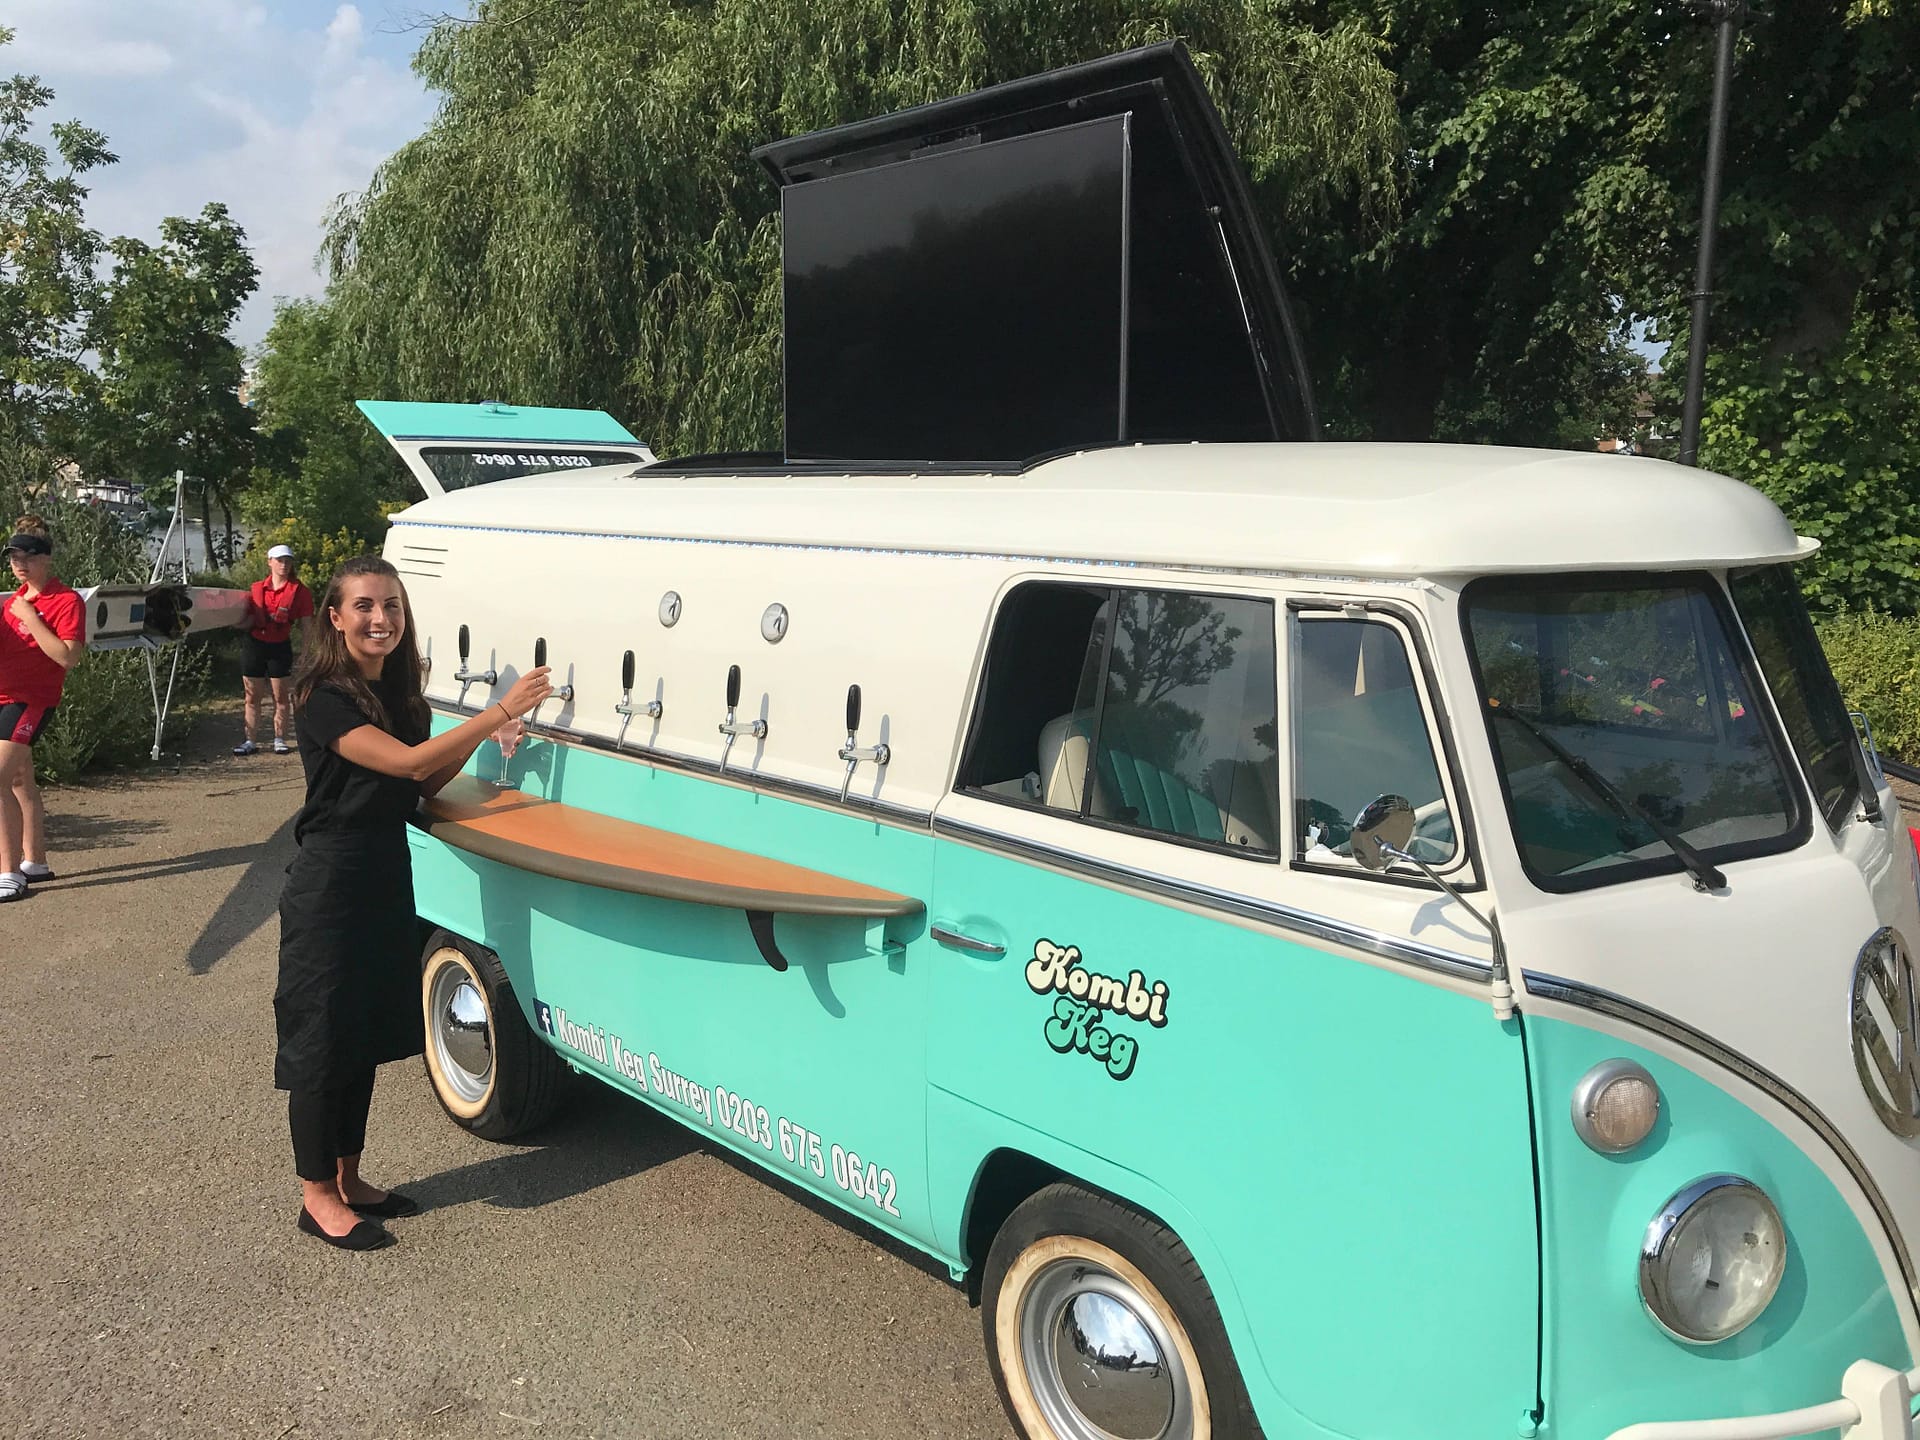 The benefits of having draught beer on tap at your wedding, served from a unique VW Camper Van